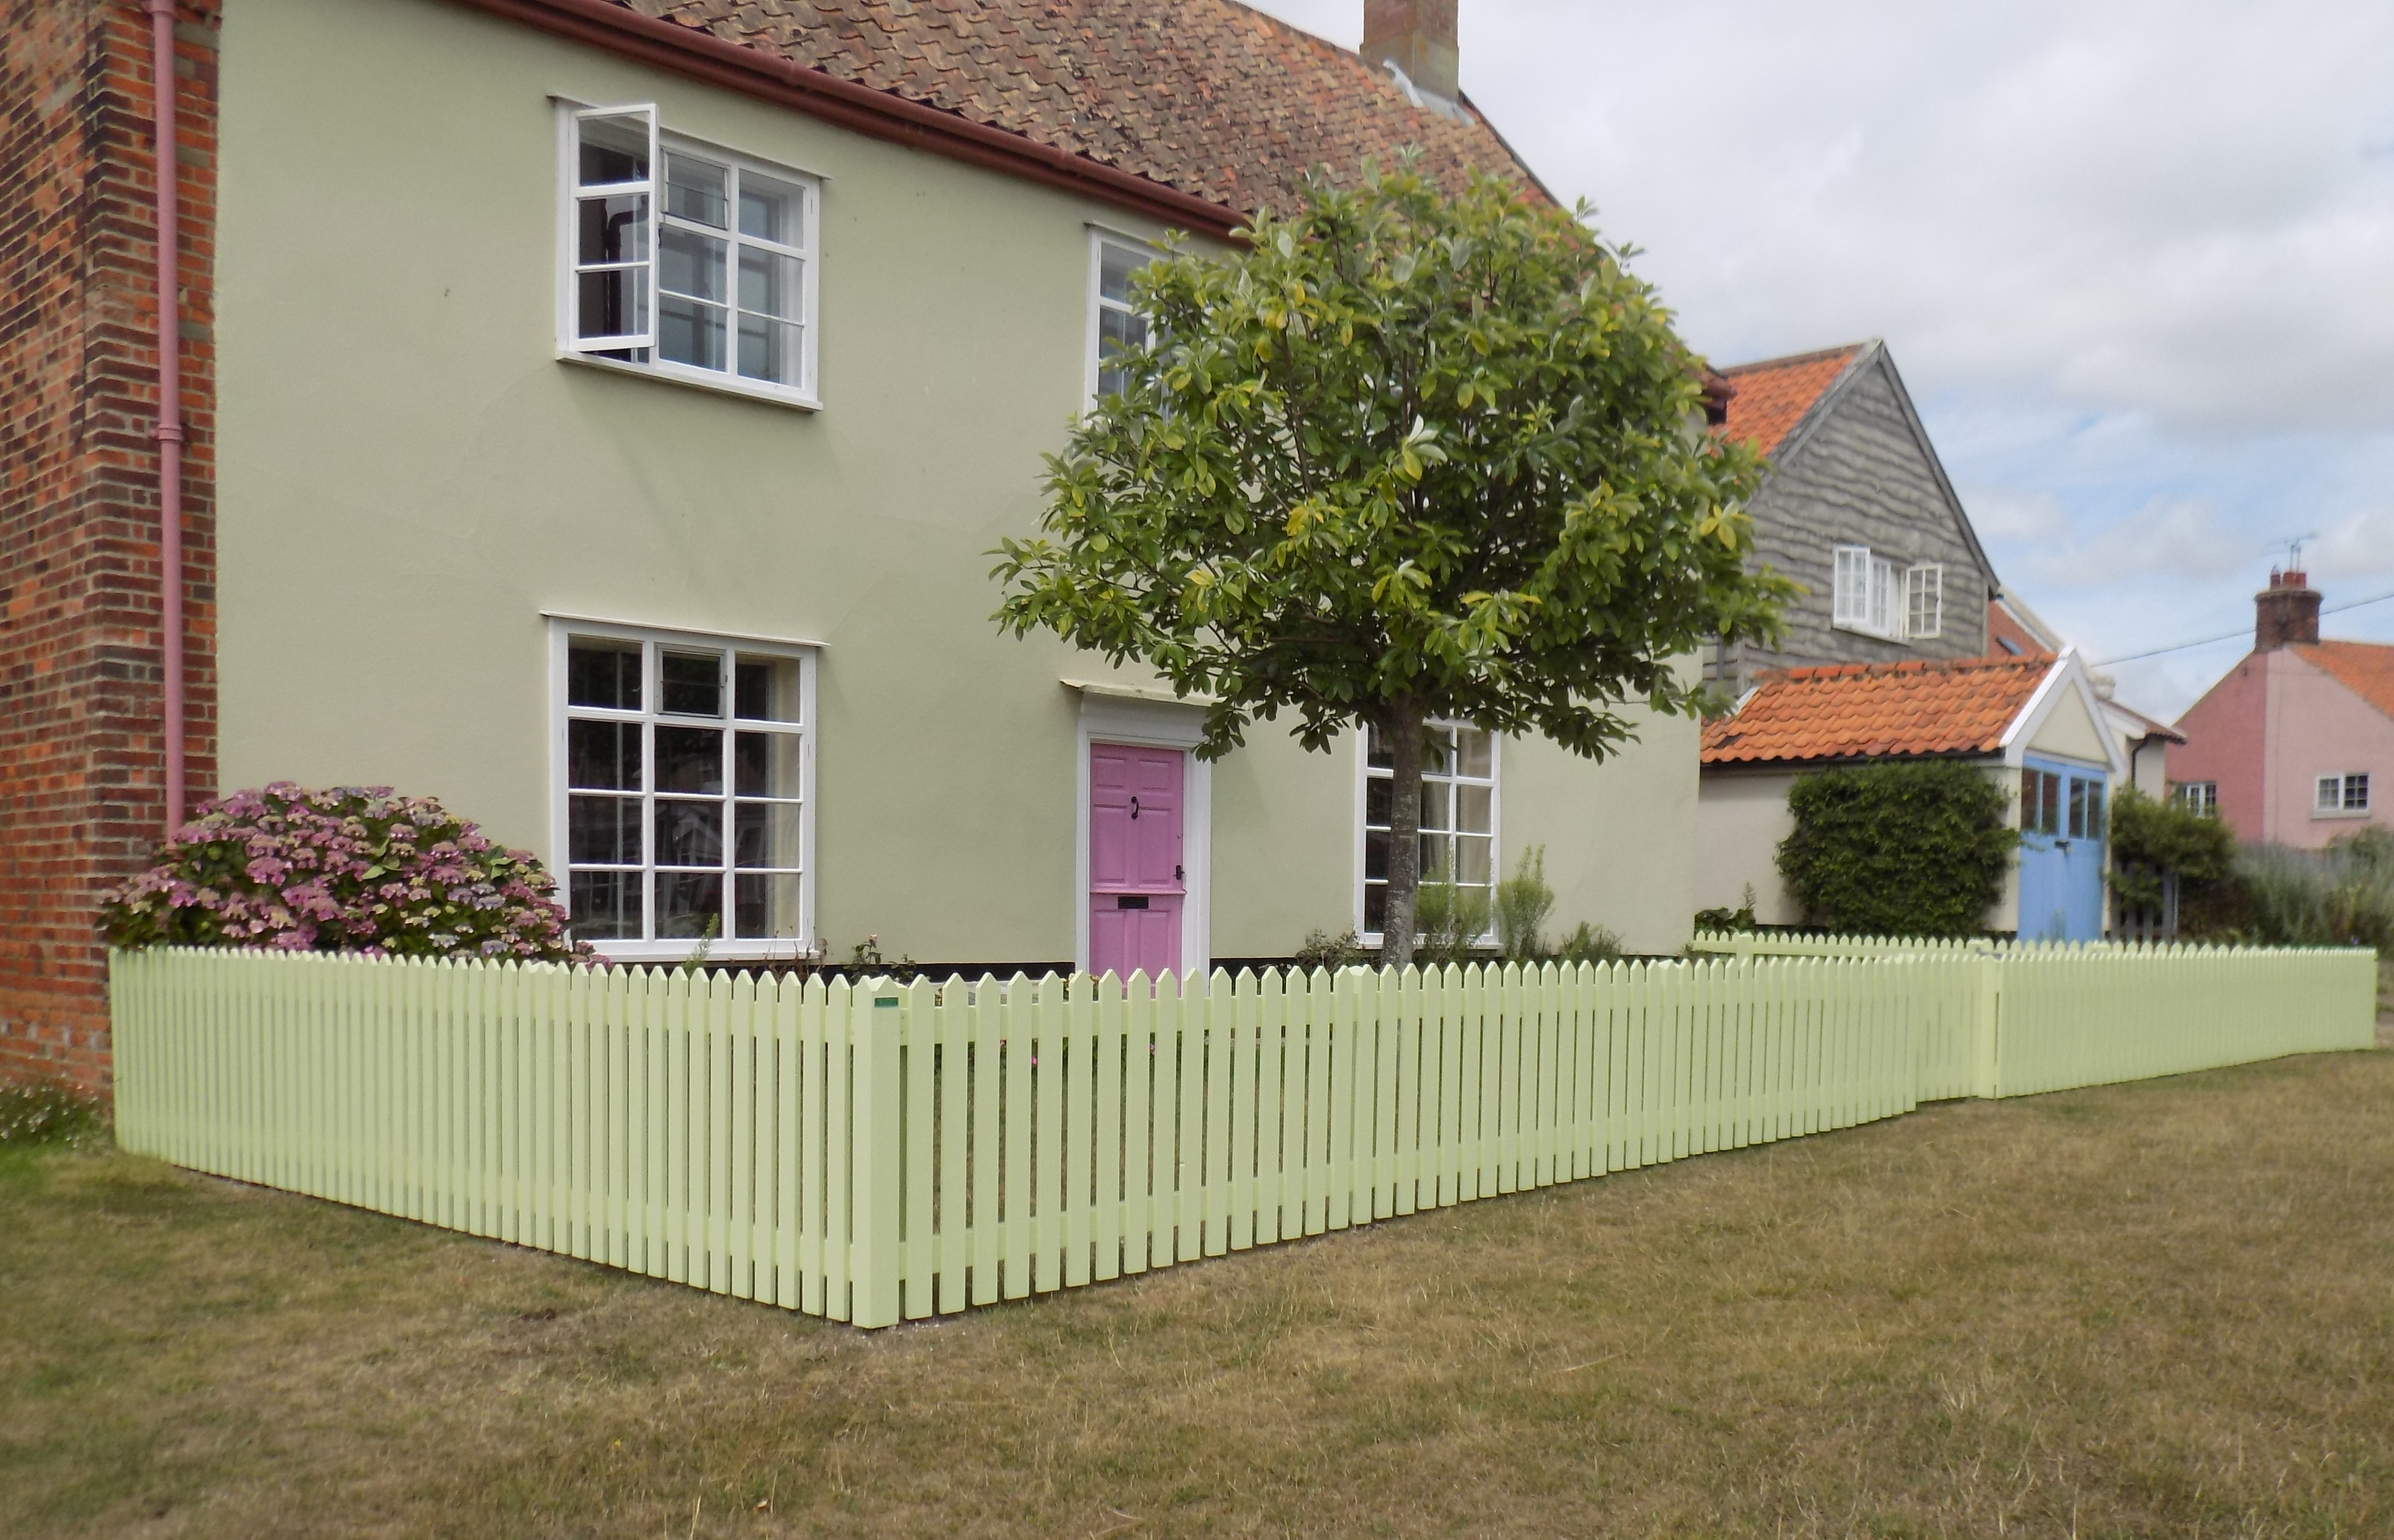 Picket fencing colour co-ordinated.